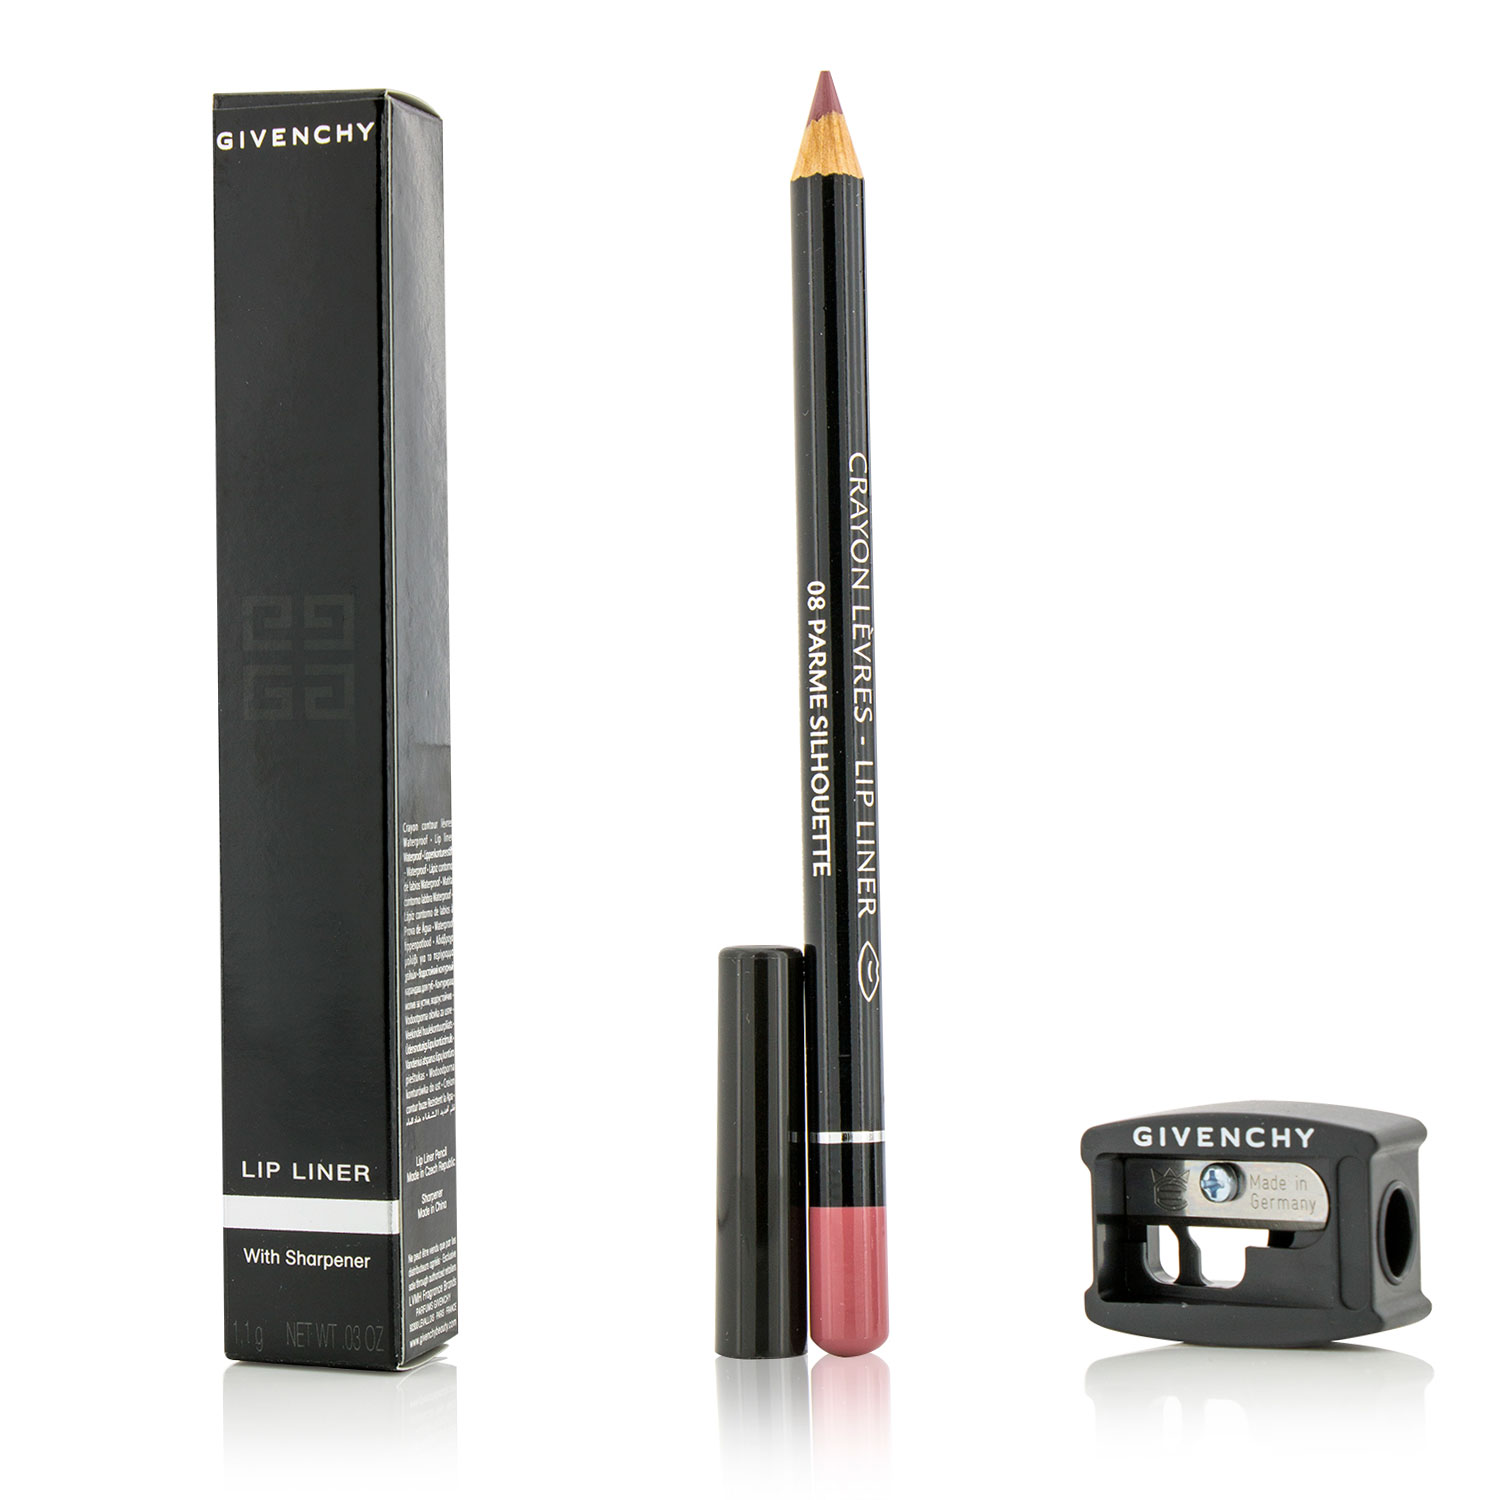 Lip Liner (With Sharpener) - # 08 Parme Silhouette Givenchy Image